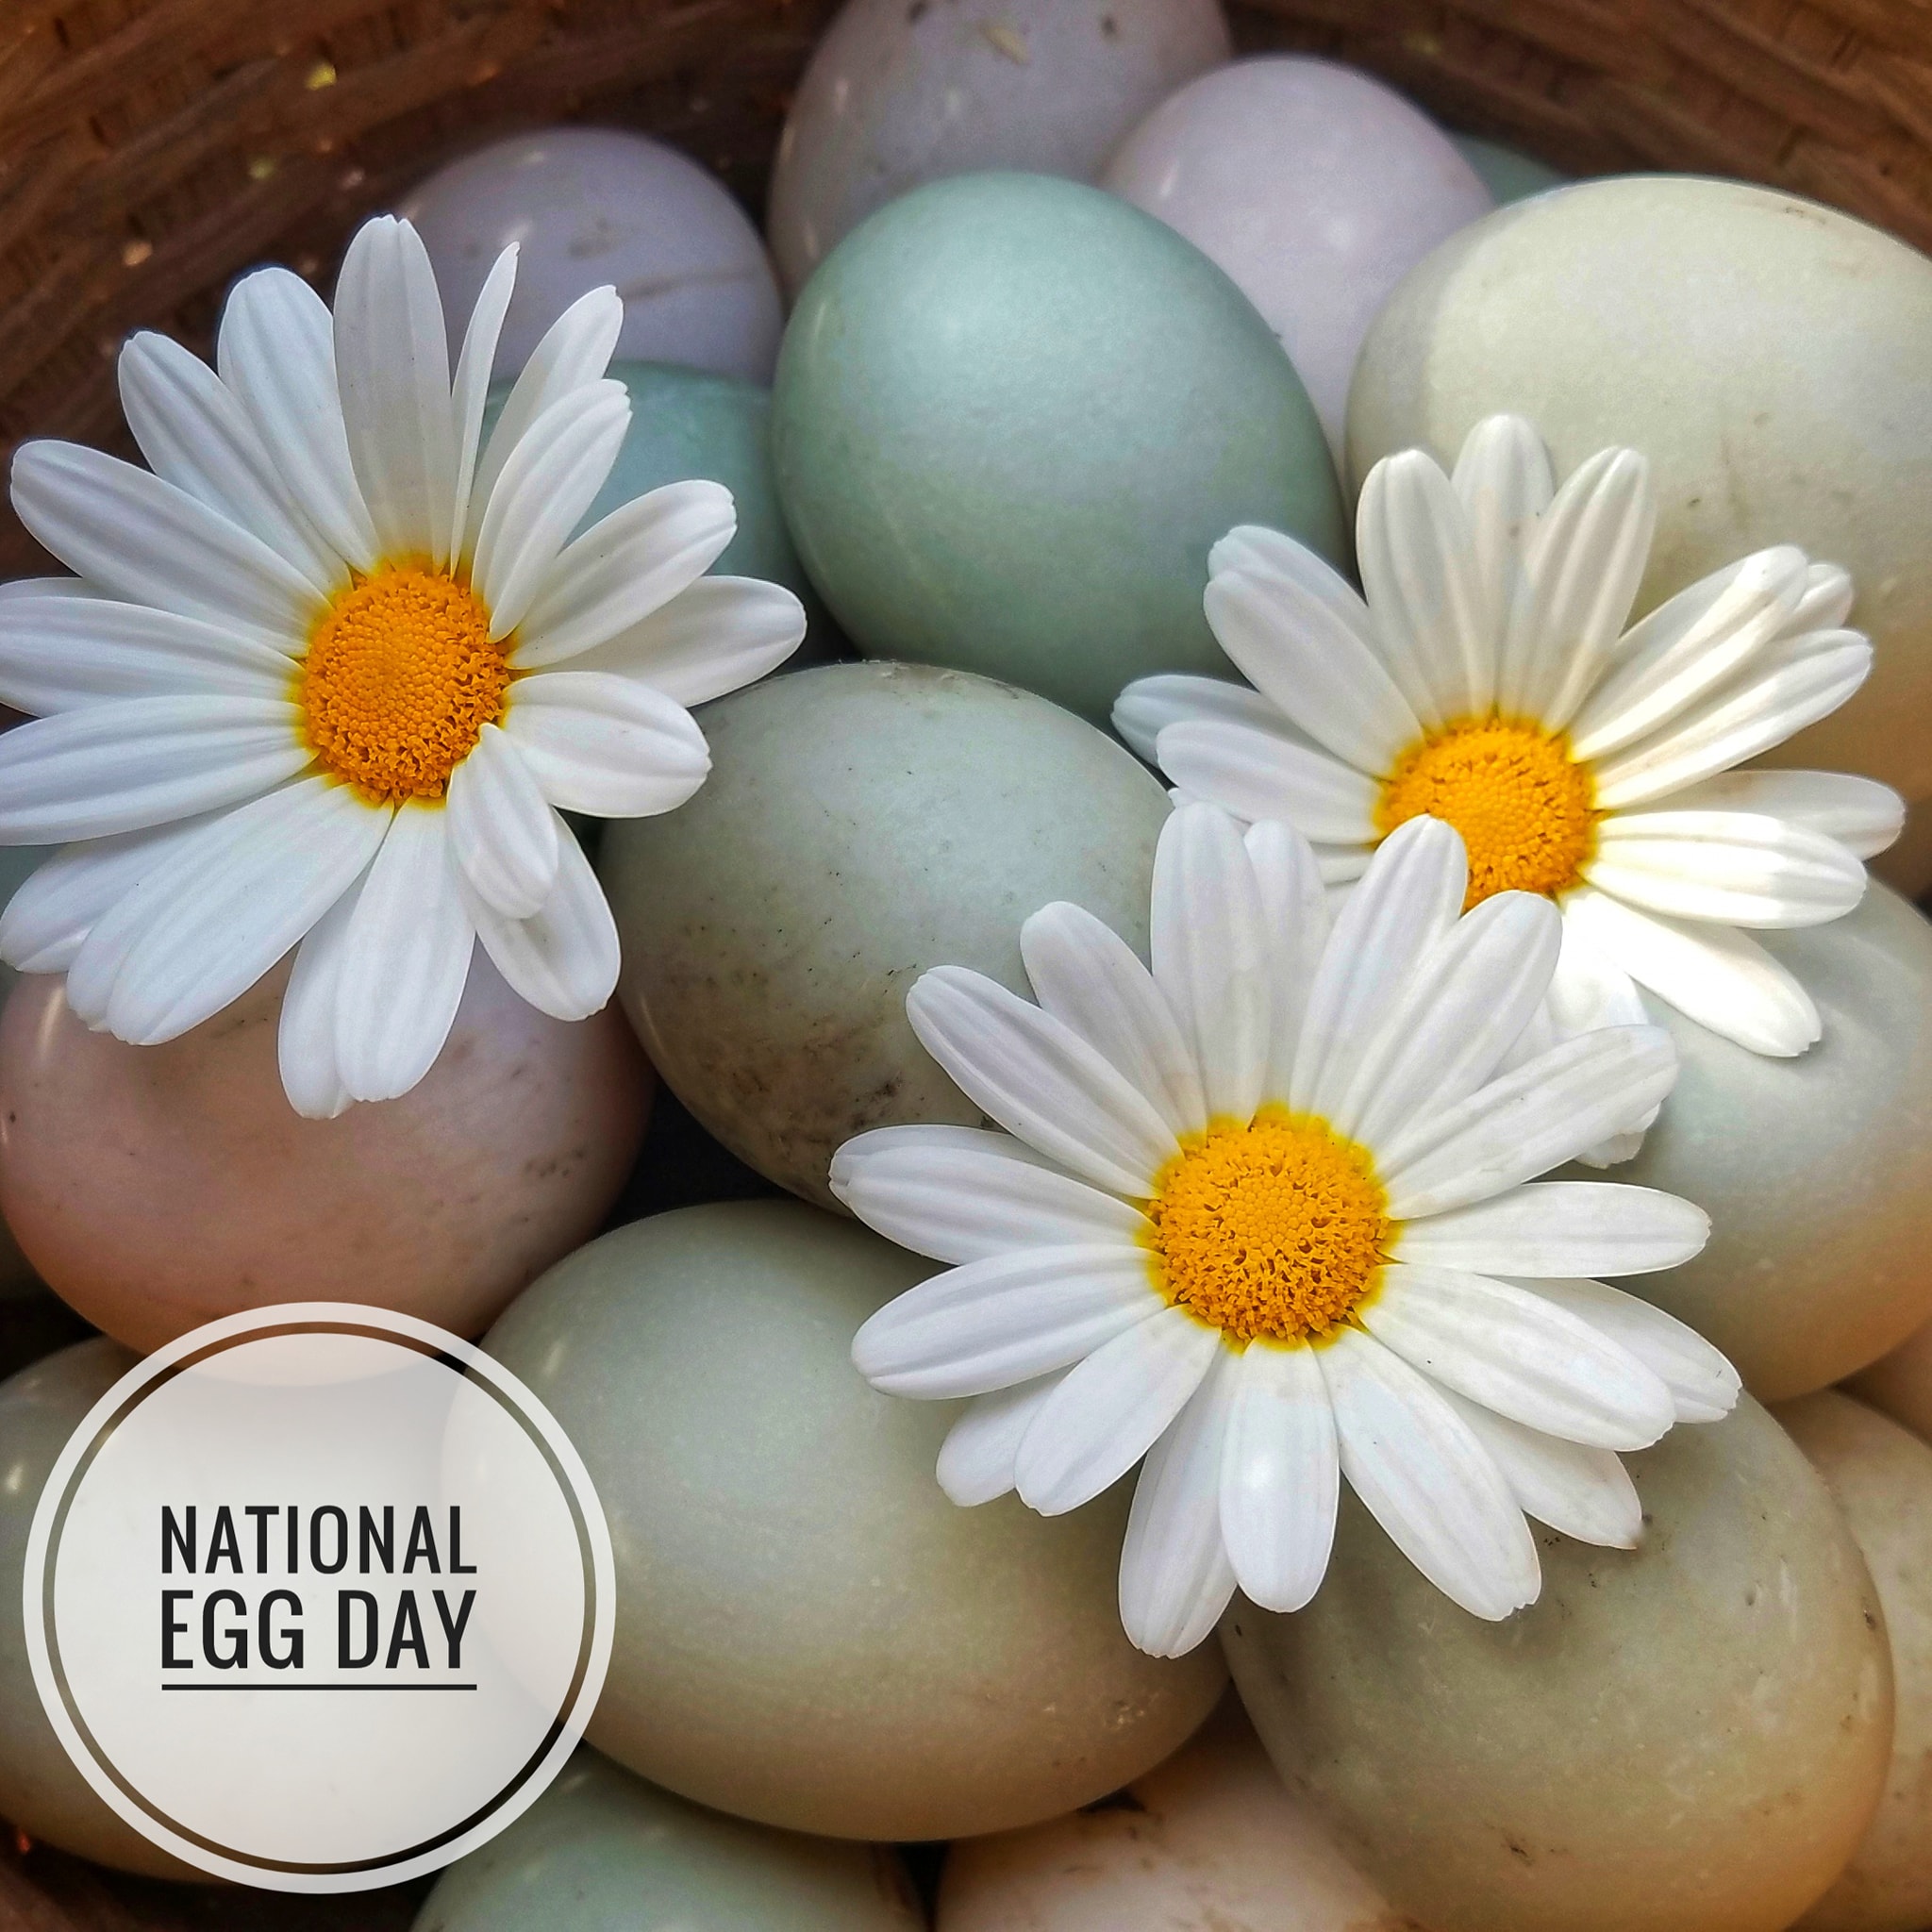 A basket full of colorful eggs with decorative daisy flowers. In the corner, text that says "National Egg Day".